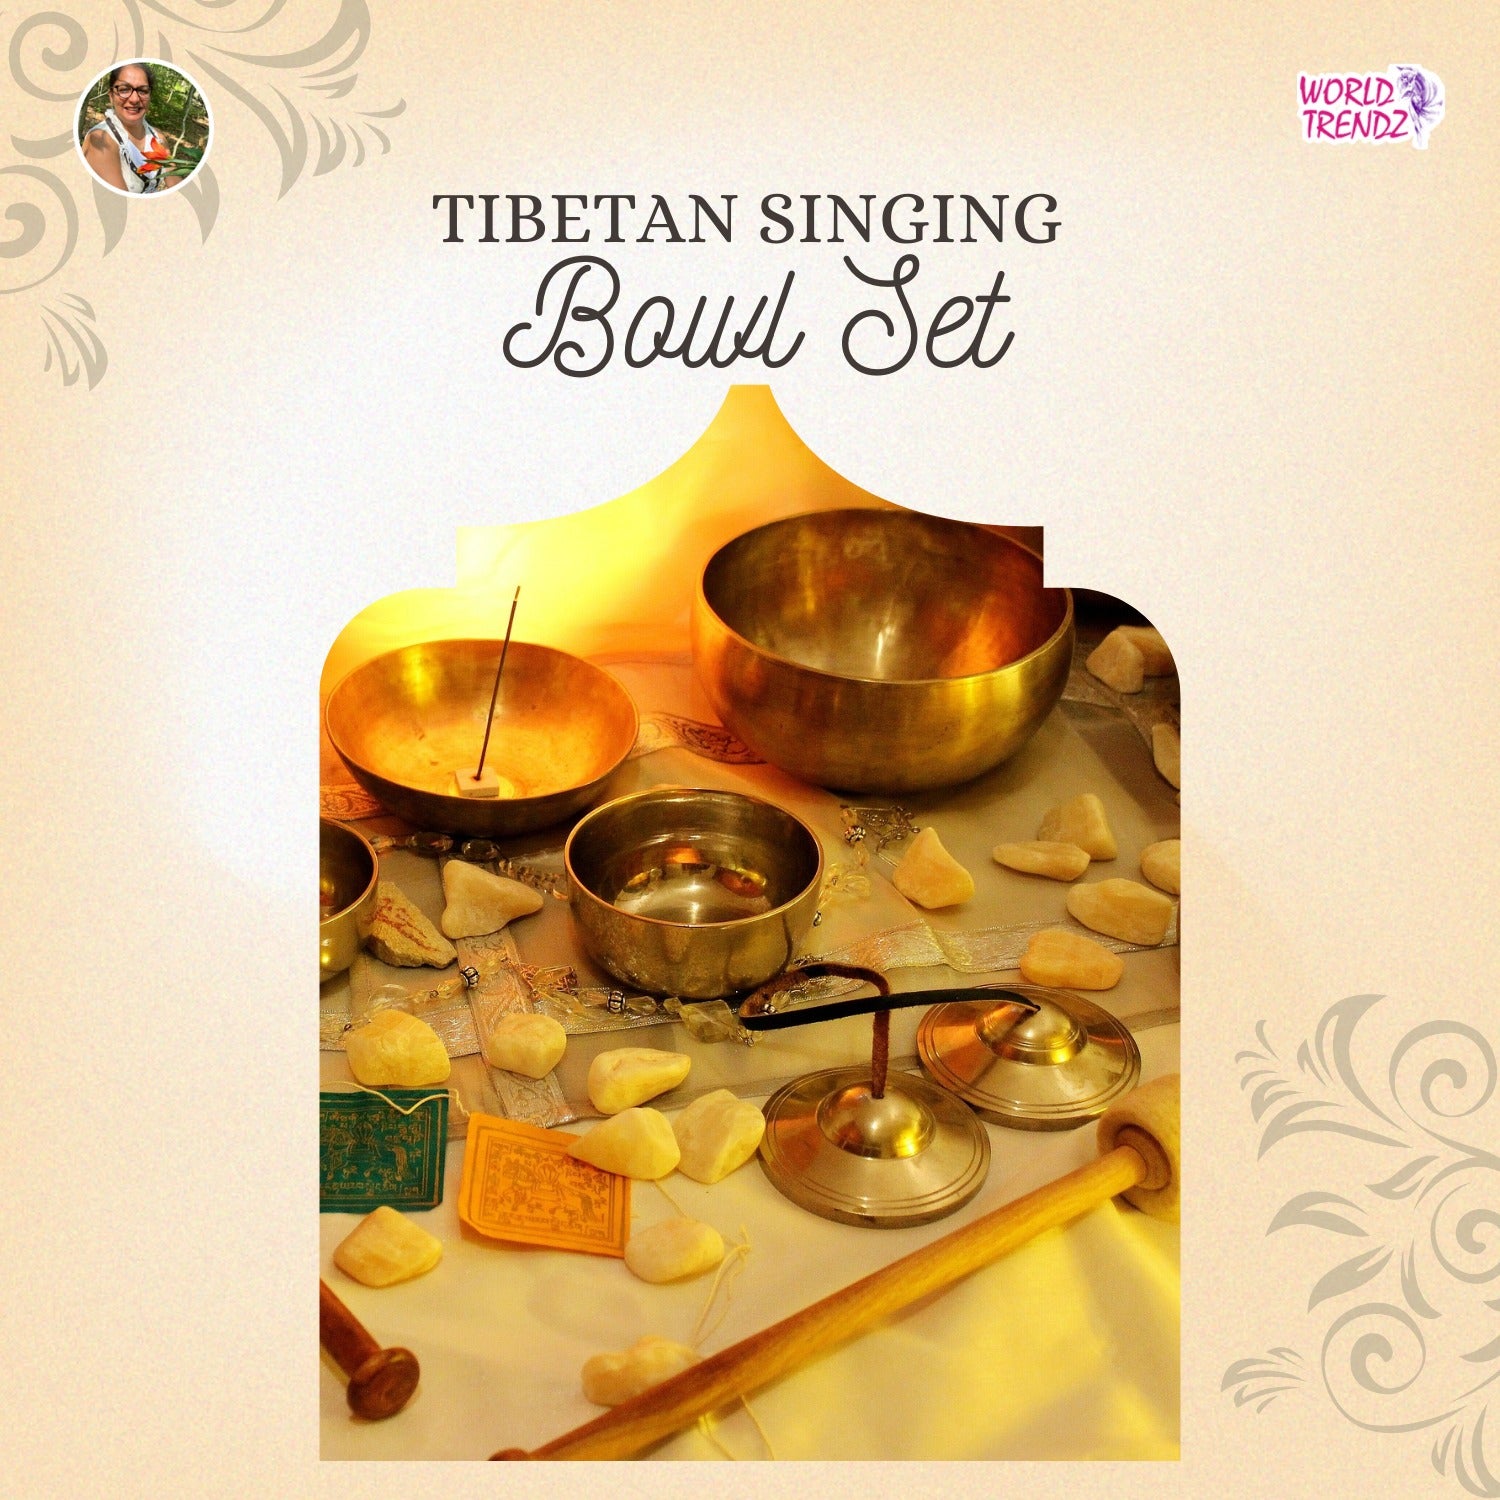 How to Choose, Use & Care for Singing Bowls